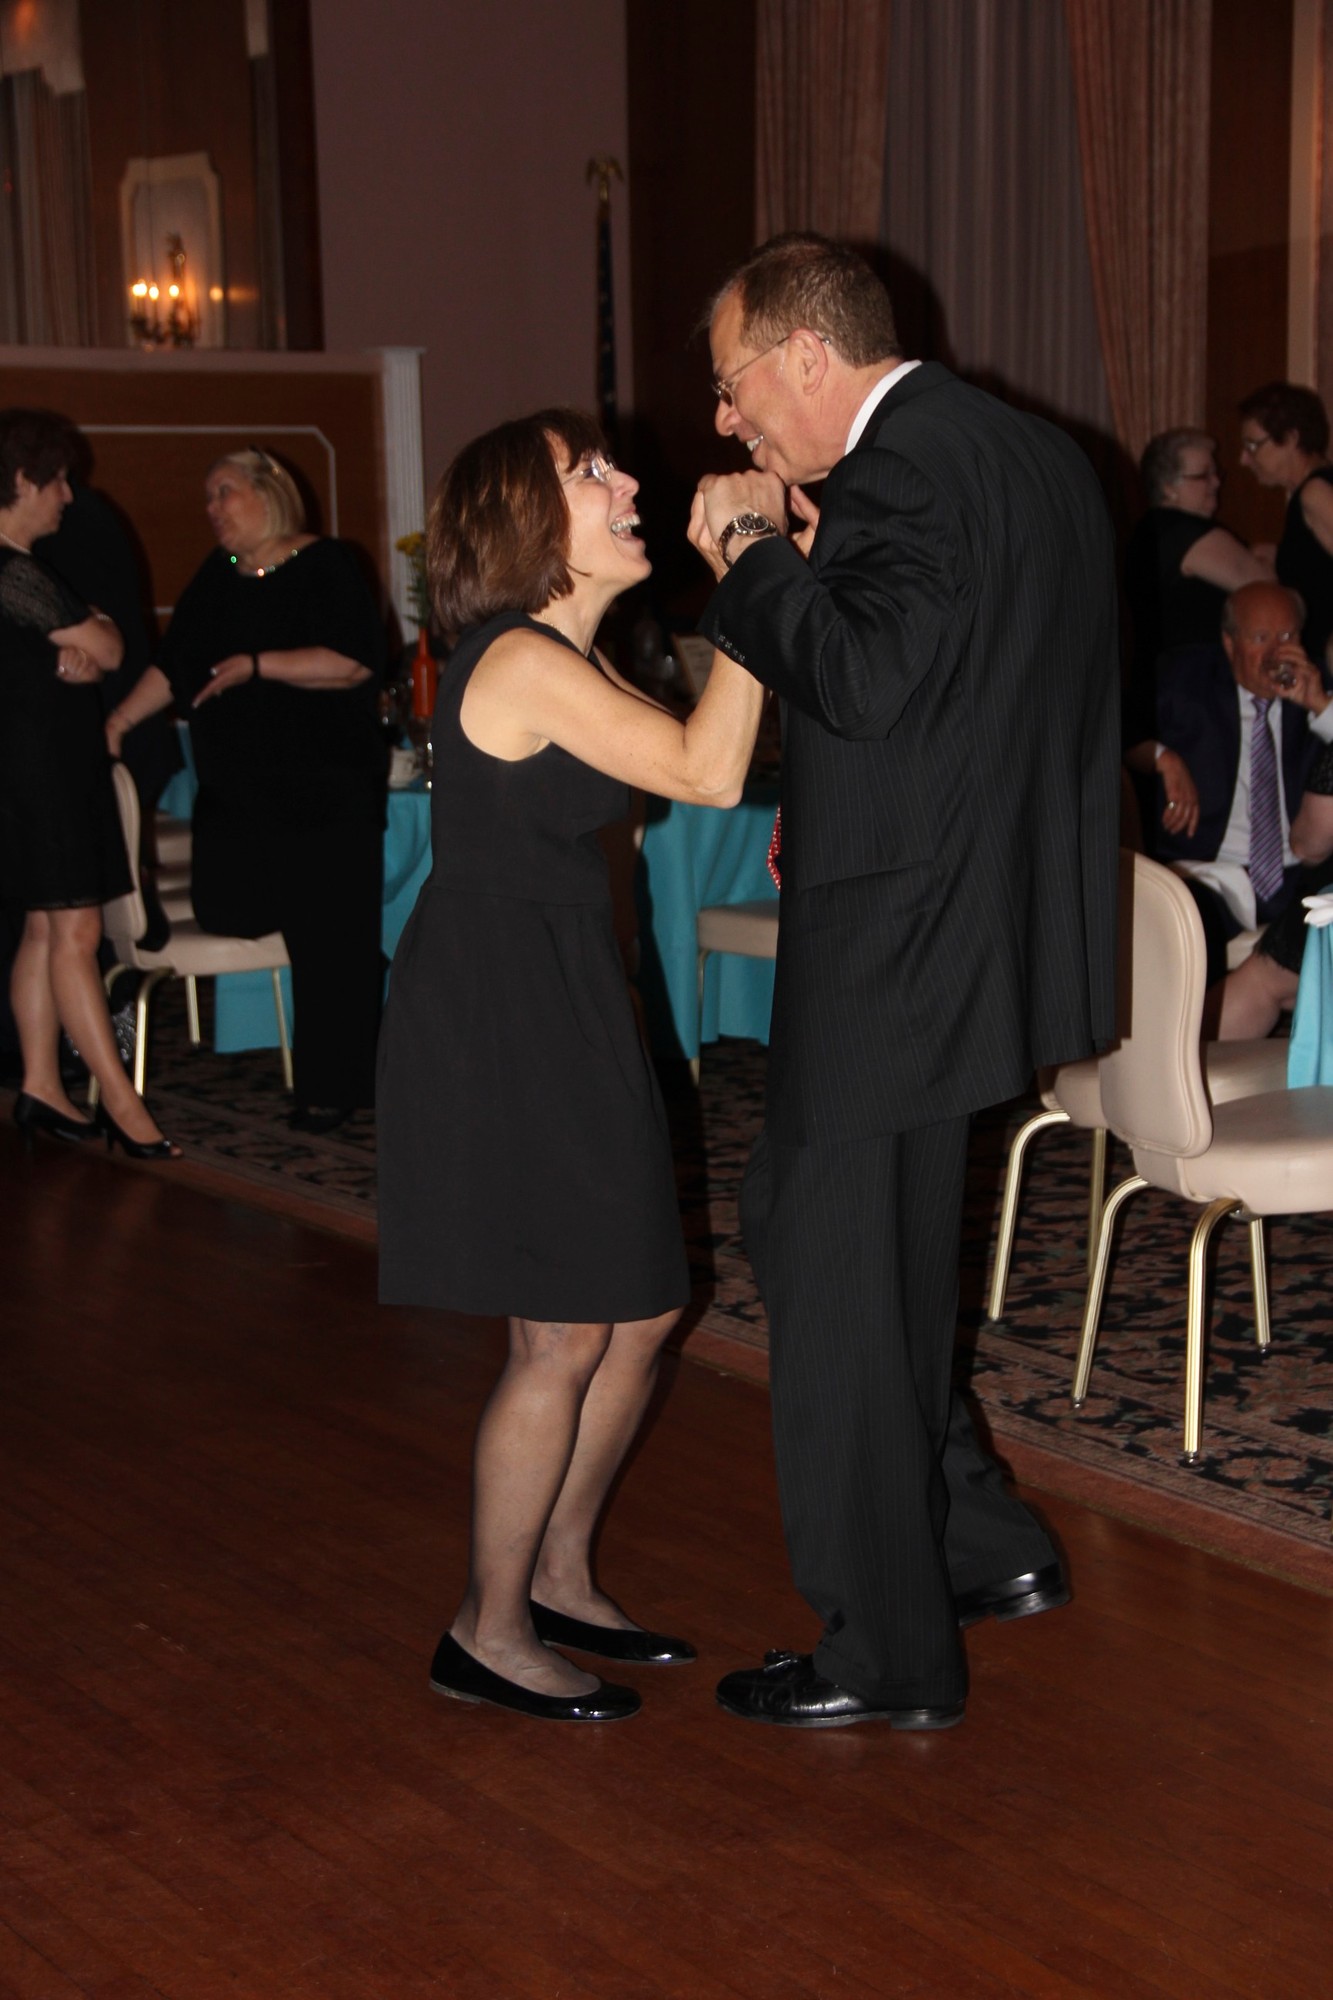 Rockville Centre residents Fredi and Ron Norris danced the night away.